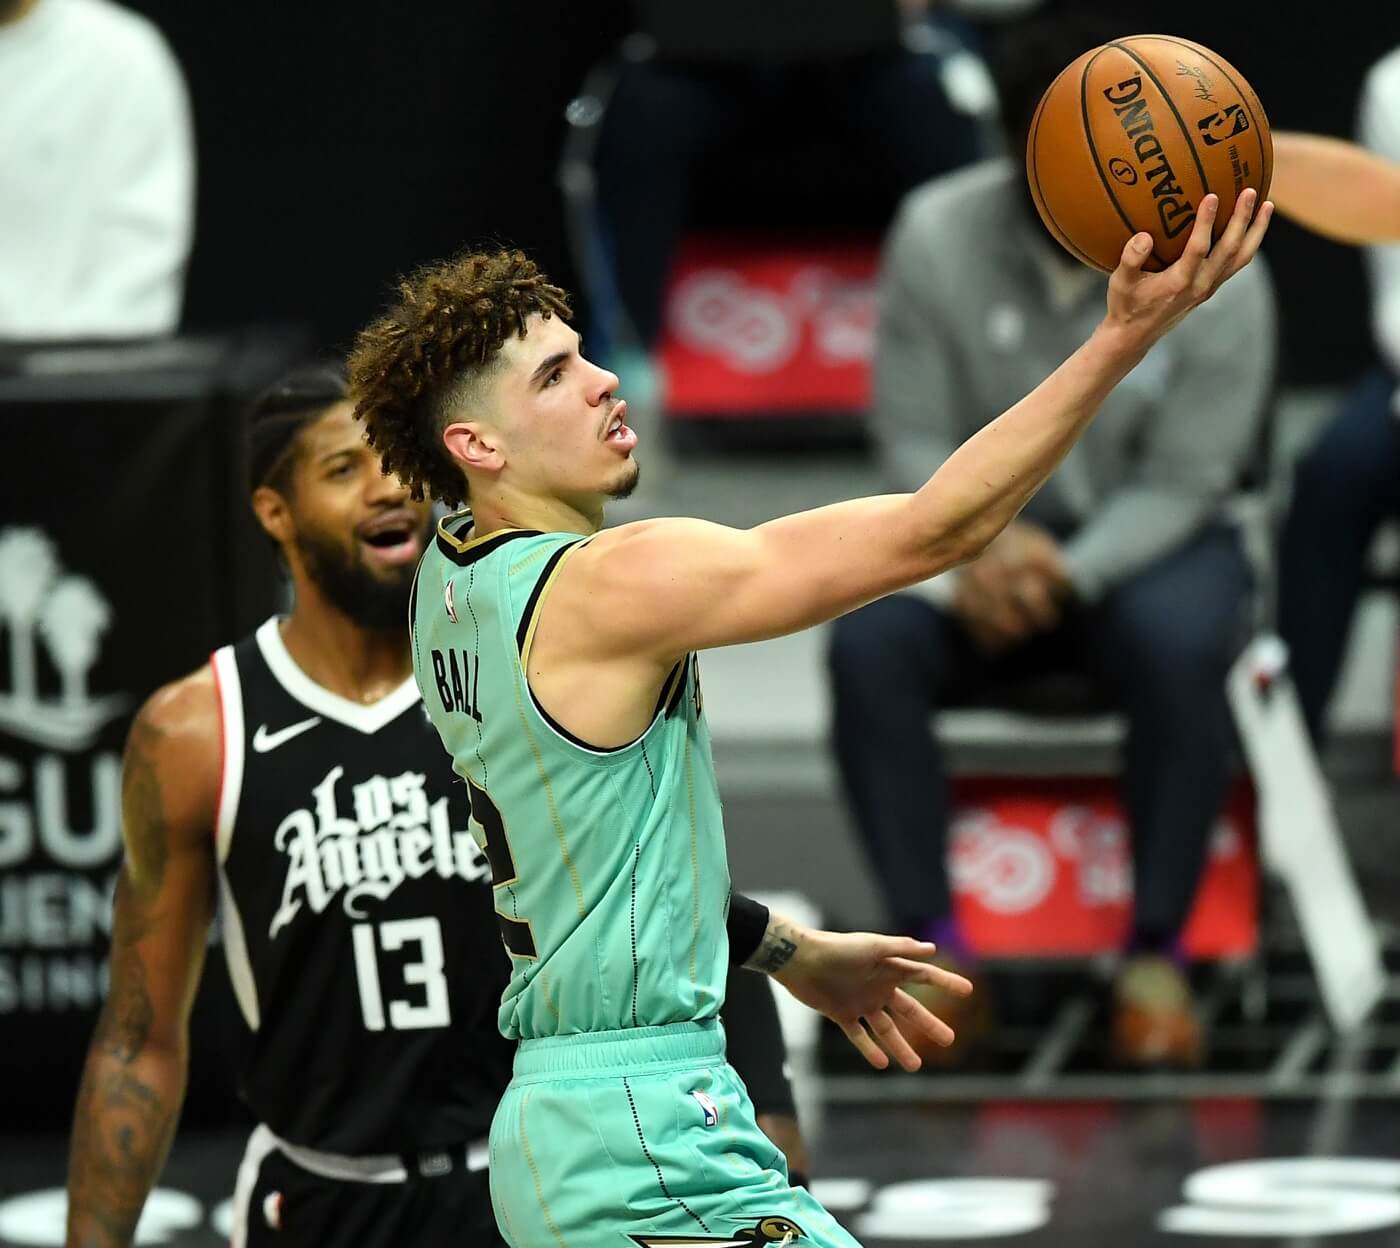 Mar 20, 2021; Los Angeles, California, USA; Los Angeles Clippers guard Paul George (13) looks on as Charlotte Hornets guard LaMelo Ball (2) goes up for a basket in the first half of the game at Staples Center. Mandatory Credit: Jayne Kamin-Oncea-USA TODAY Sports